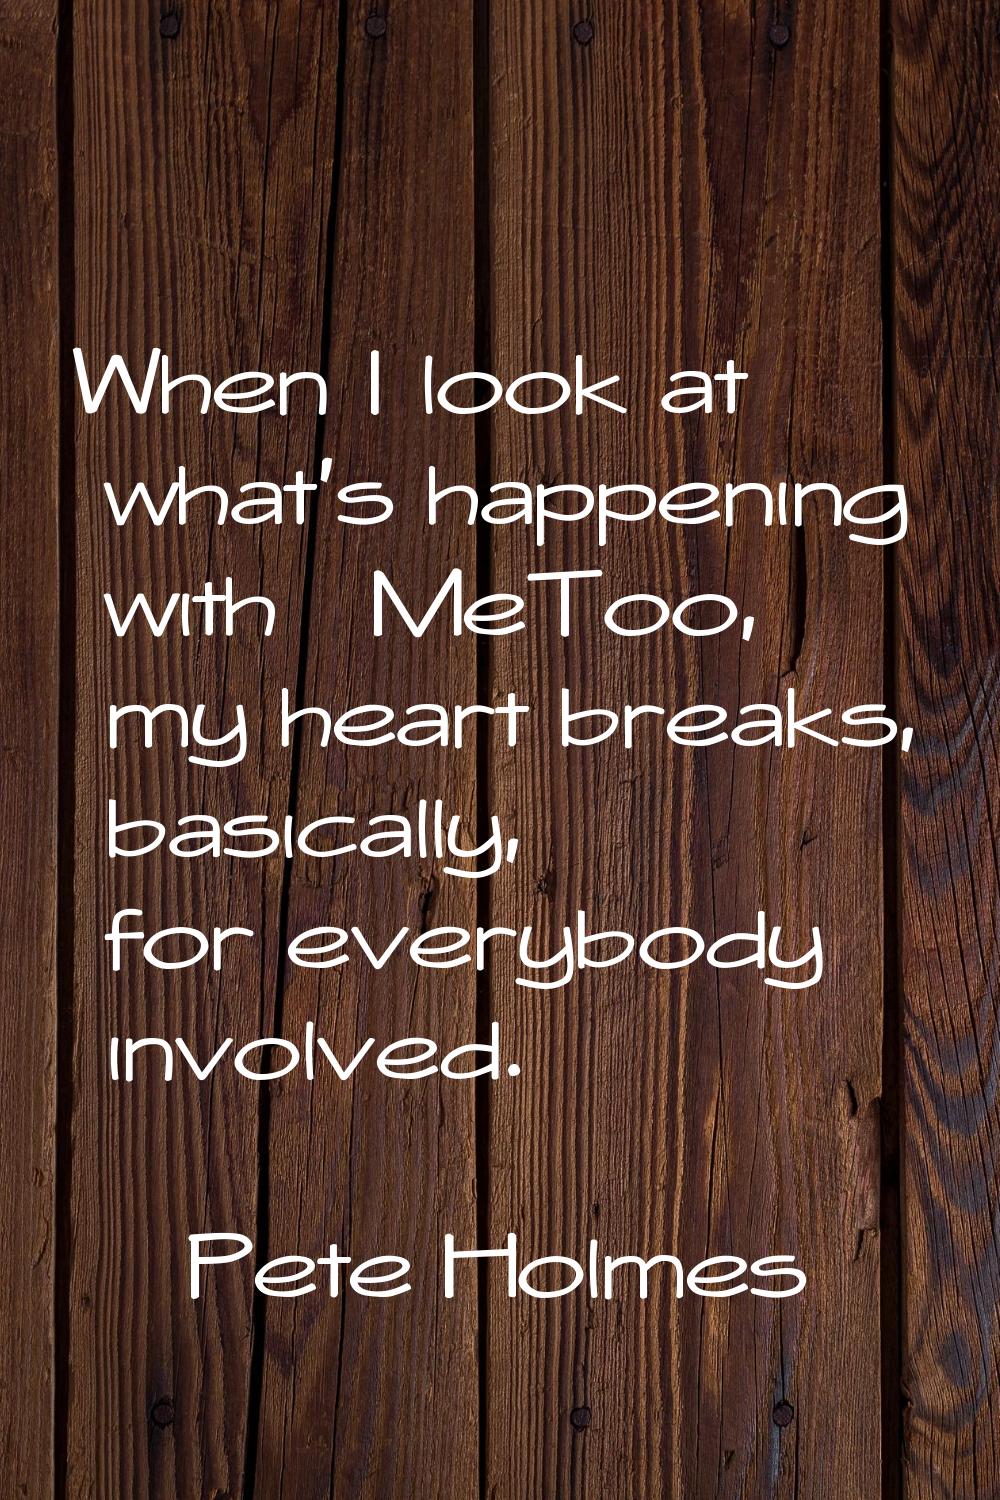 When I look at what's happening with #MeToo, my heart breaks, basically, for everybody involved.